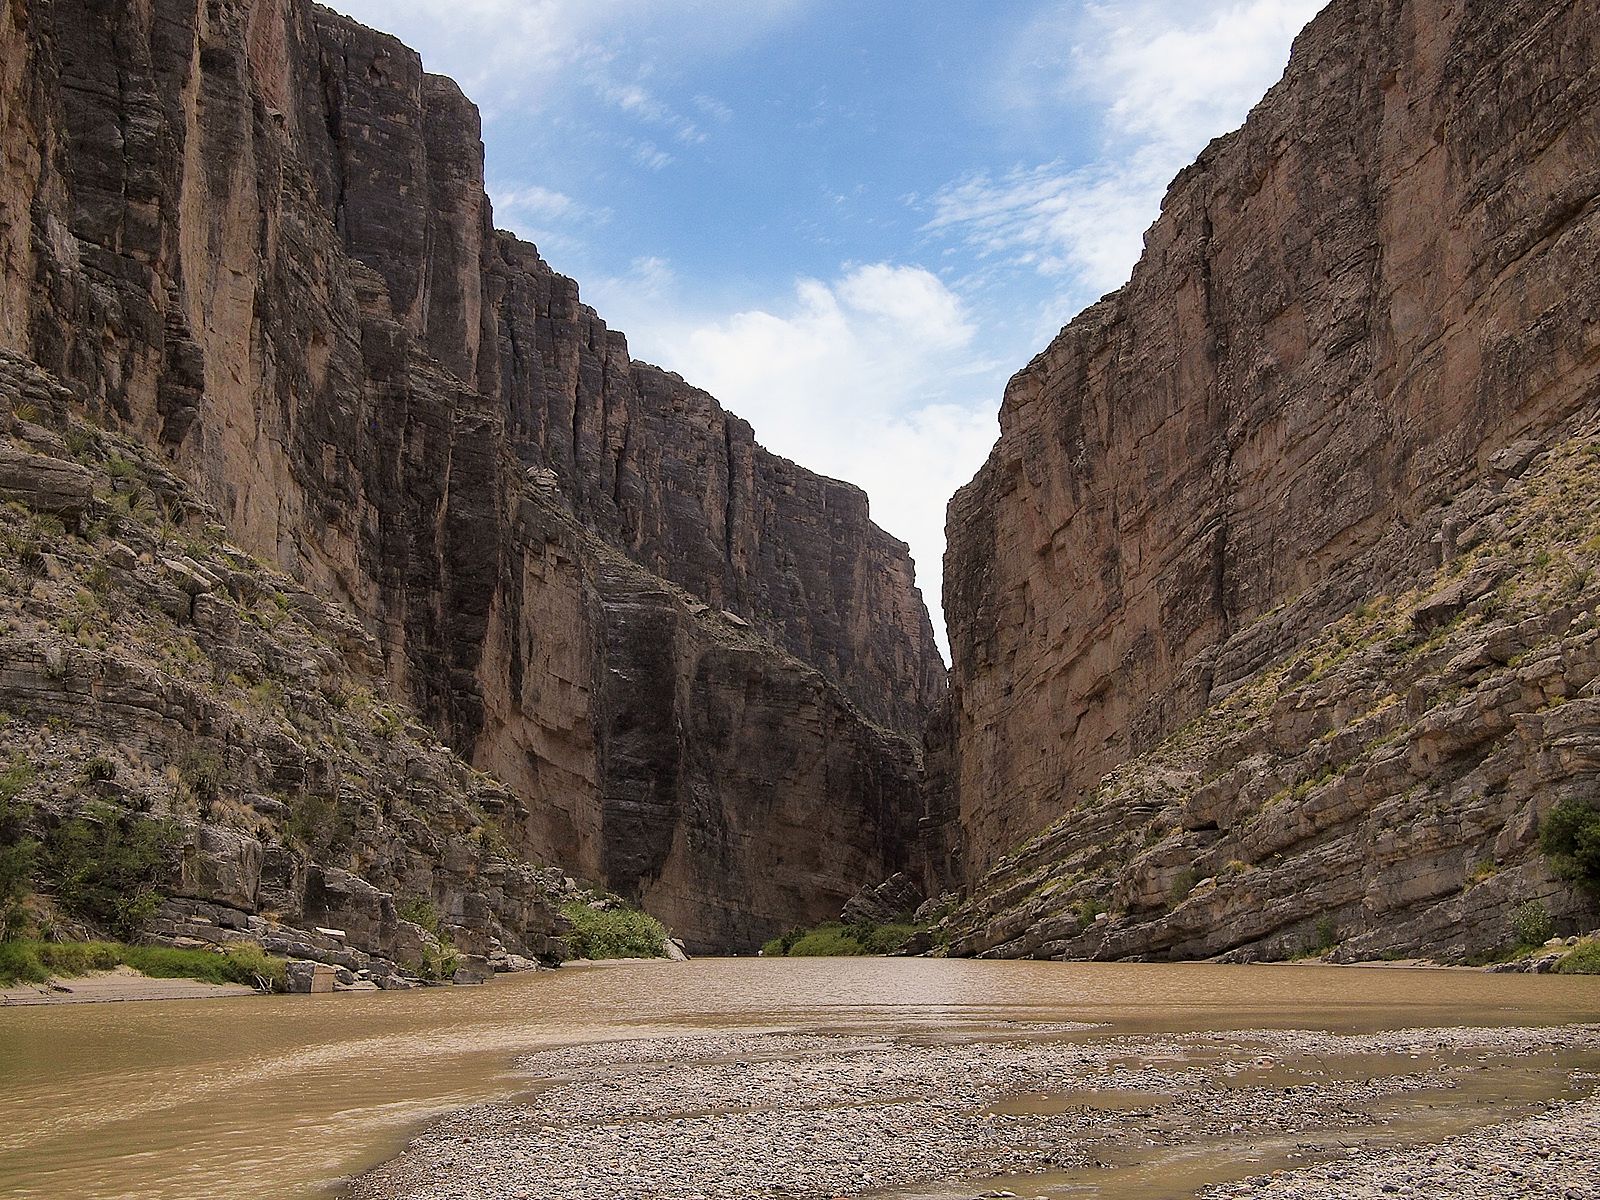 Big Bend National Park Closing Immediately Due to Positive COVID-19 Case